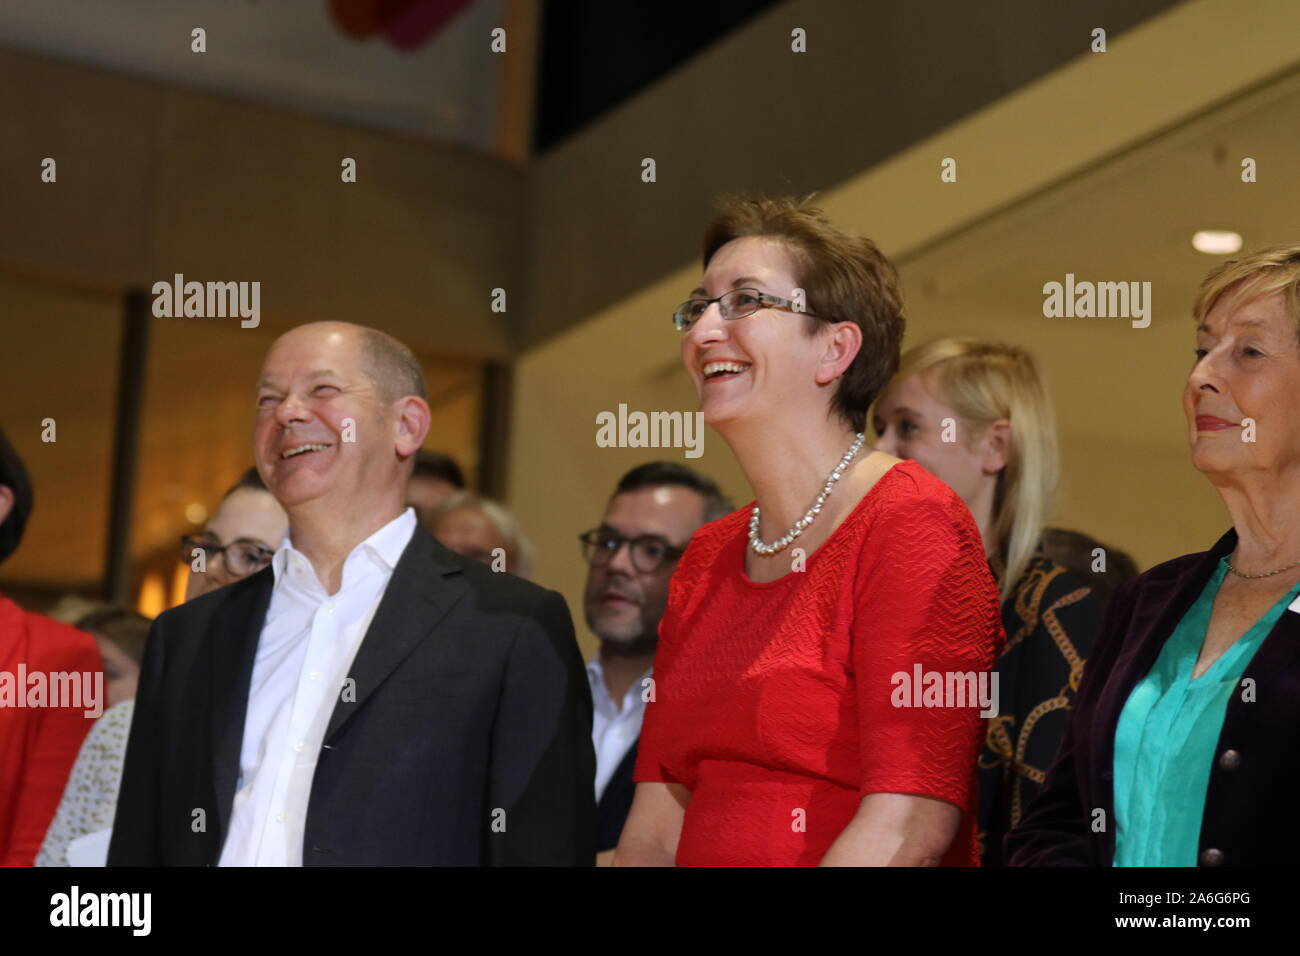 Germany, Berlin, 10/26/2019. Olaf Scholz and Klara Geywitz in the SPD headquarters in Berlin. The SPD members elect Federal Finance Minister Olaf Scholz and Klara Geywitz just ahead of Norbert Walter-Borjans and Saskia Esken for the SPD presidency. The race for the SPD presidency goes into the runoff election in November: the two candidates will then be elected at the party congress. Stock Photo